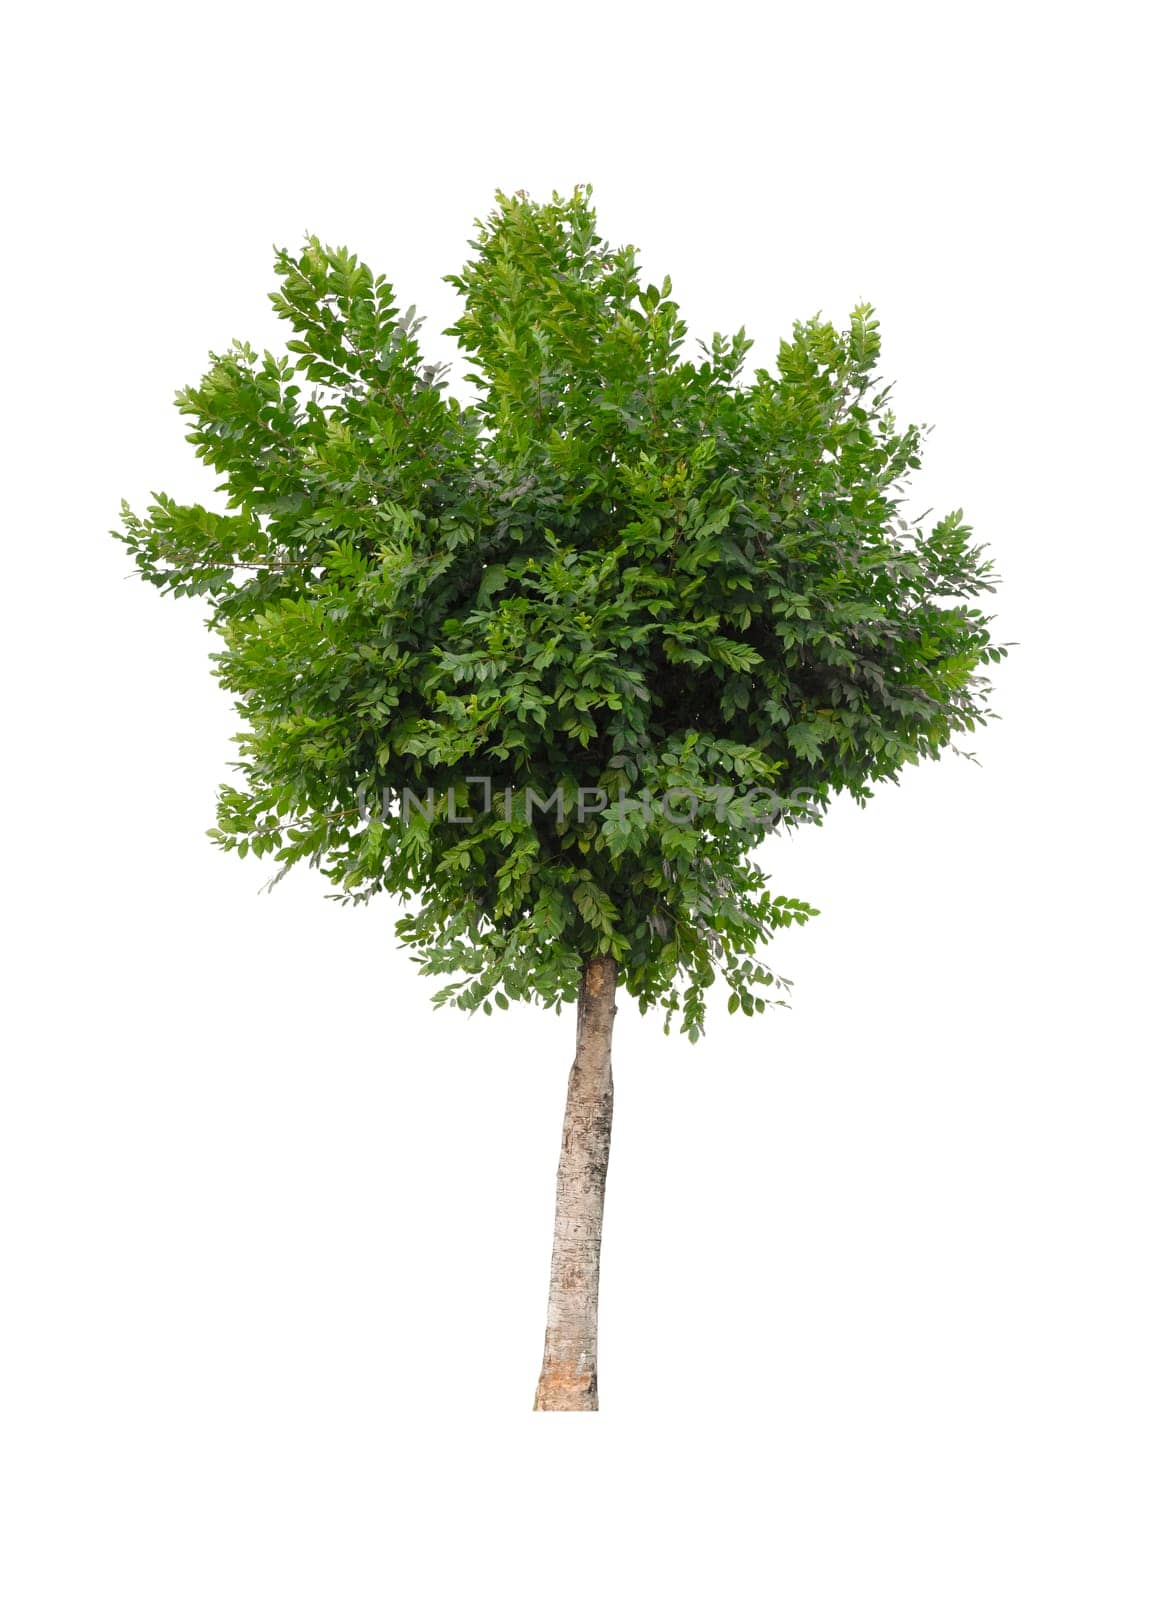 The Tree isolated on white background, Save Clipping Path. Tropical tree isolated. by Gamjai